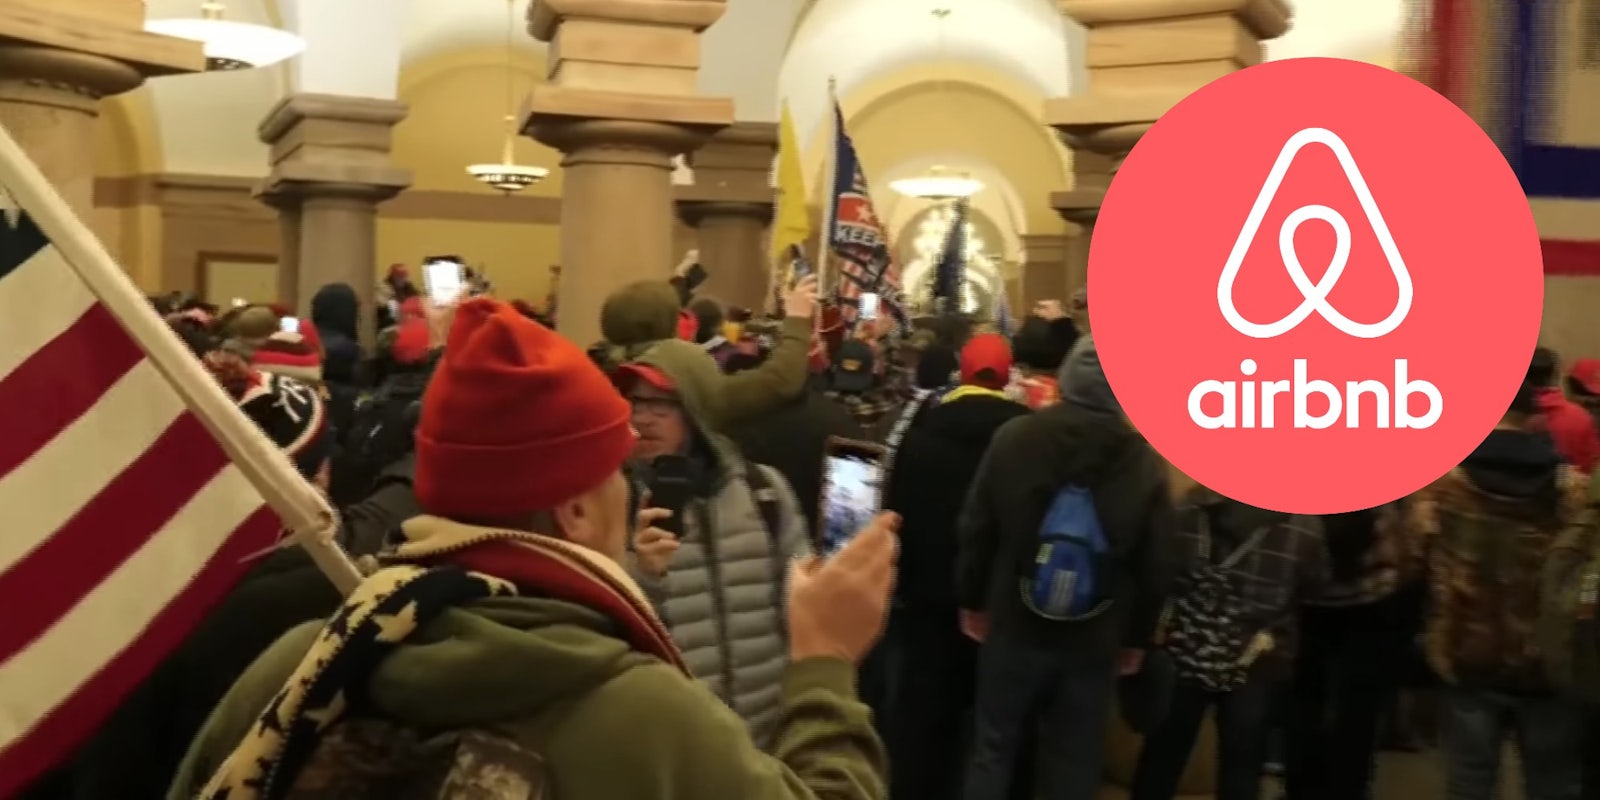 Rioters at the Capitol and the Airbnb logo